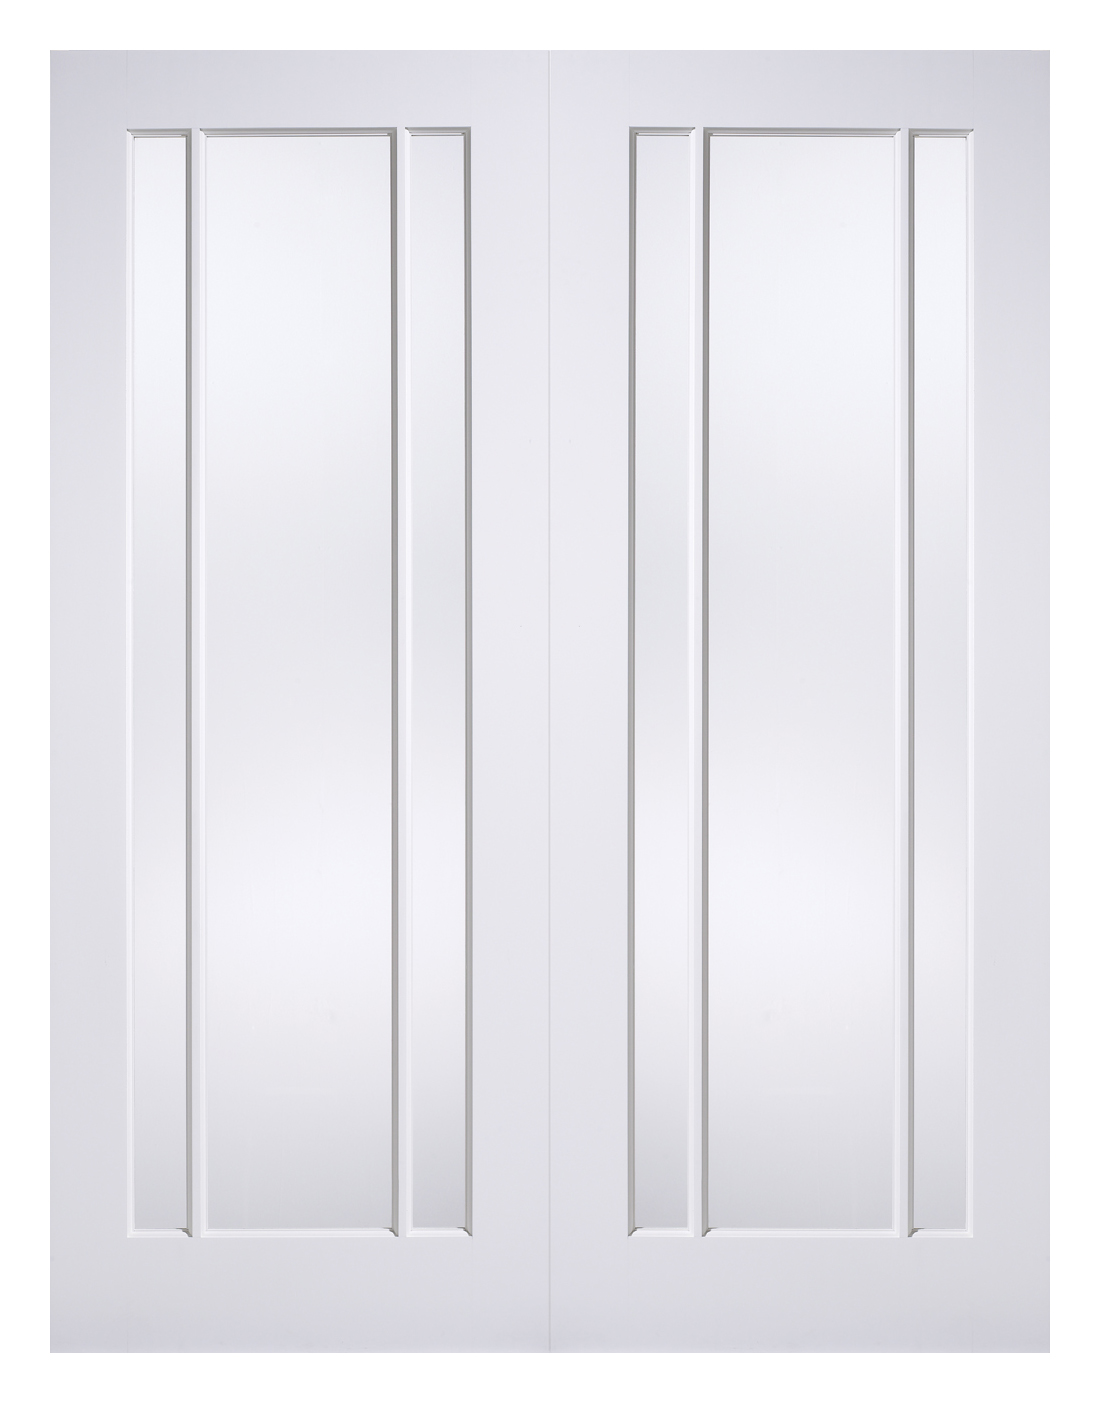 Image of LPD Internal Lincoln Pair Primed White Solid Core Door - 1067 x 1981mm